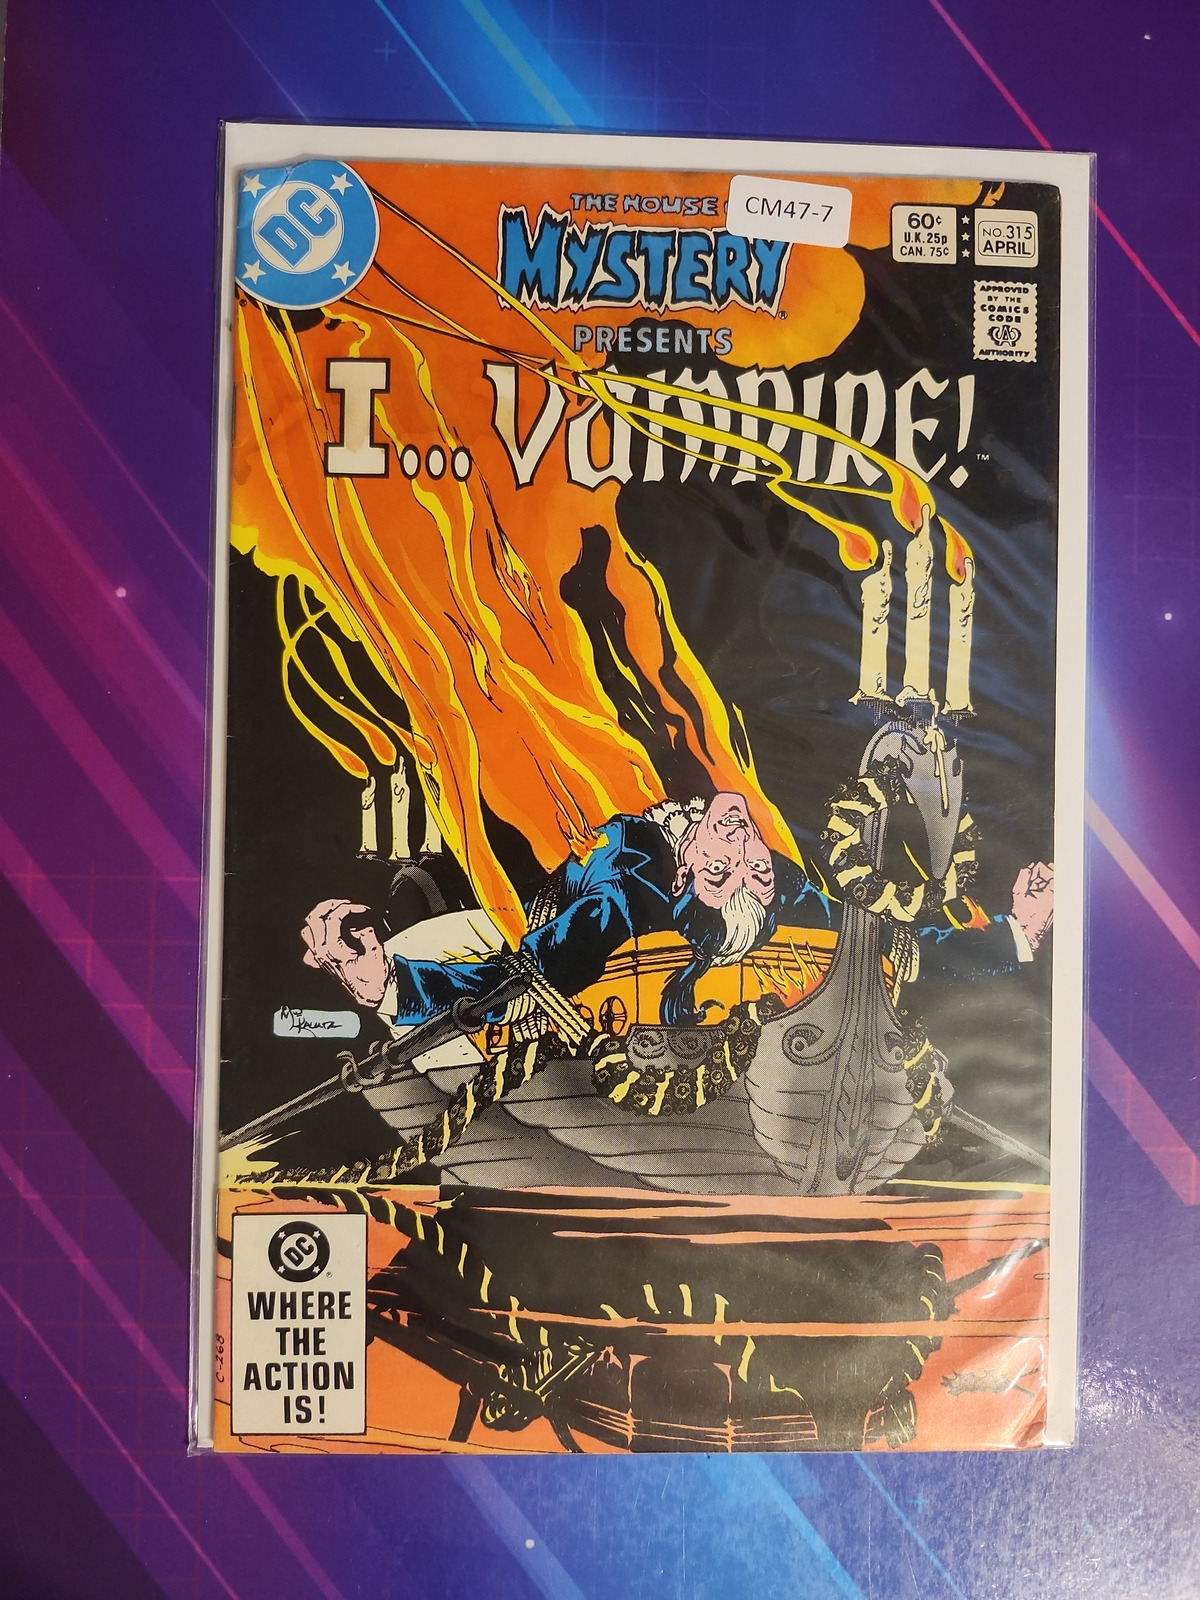 HOUSE OF MYSTERY #315 VOL. 1 MID GRADE DC COMIC BOOK CM47-7